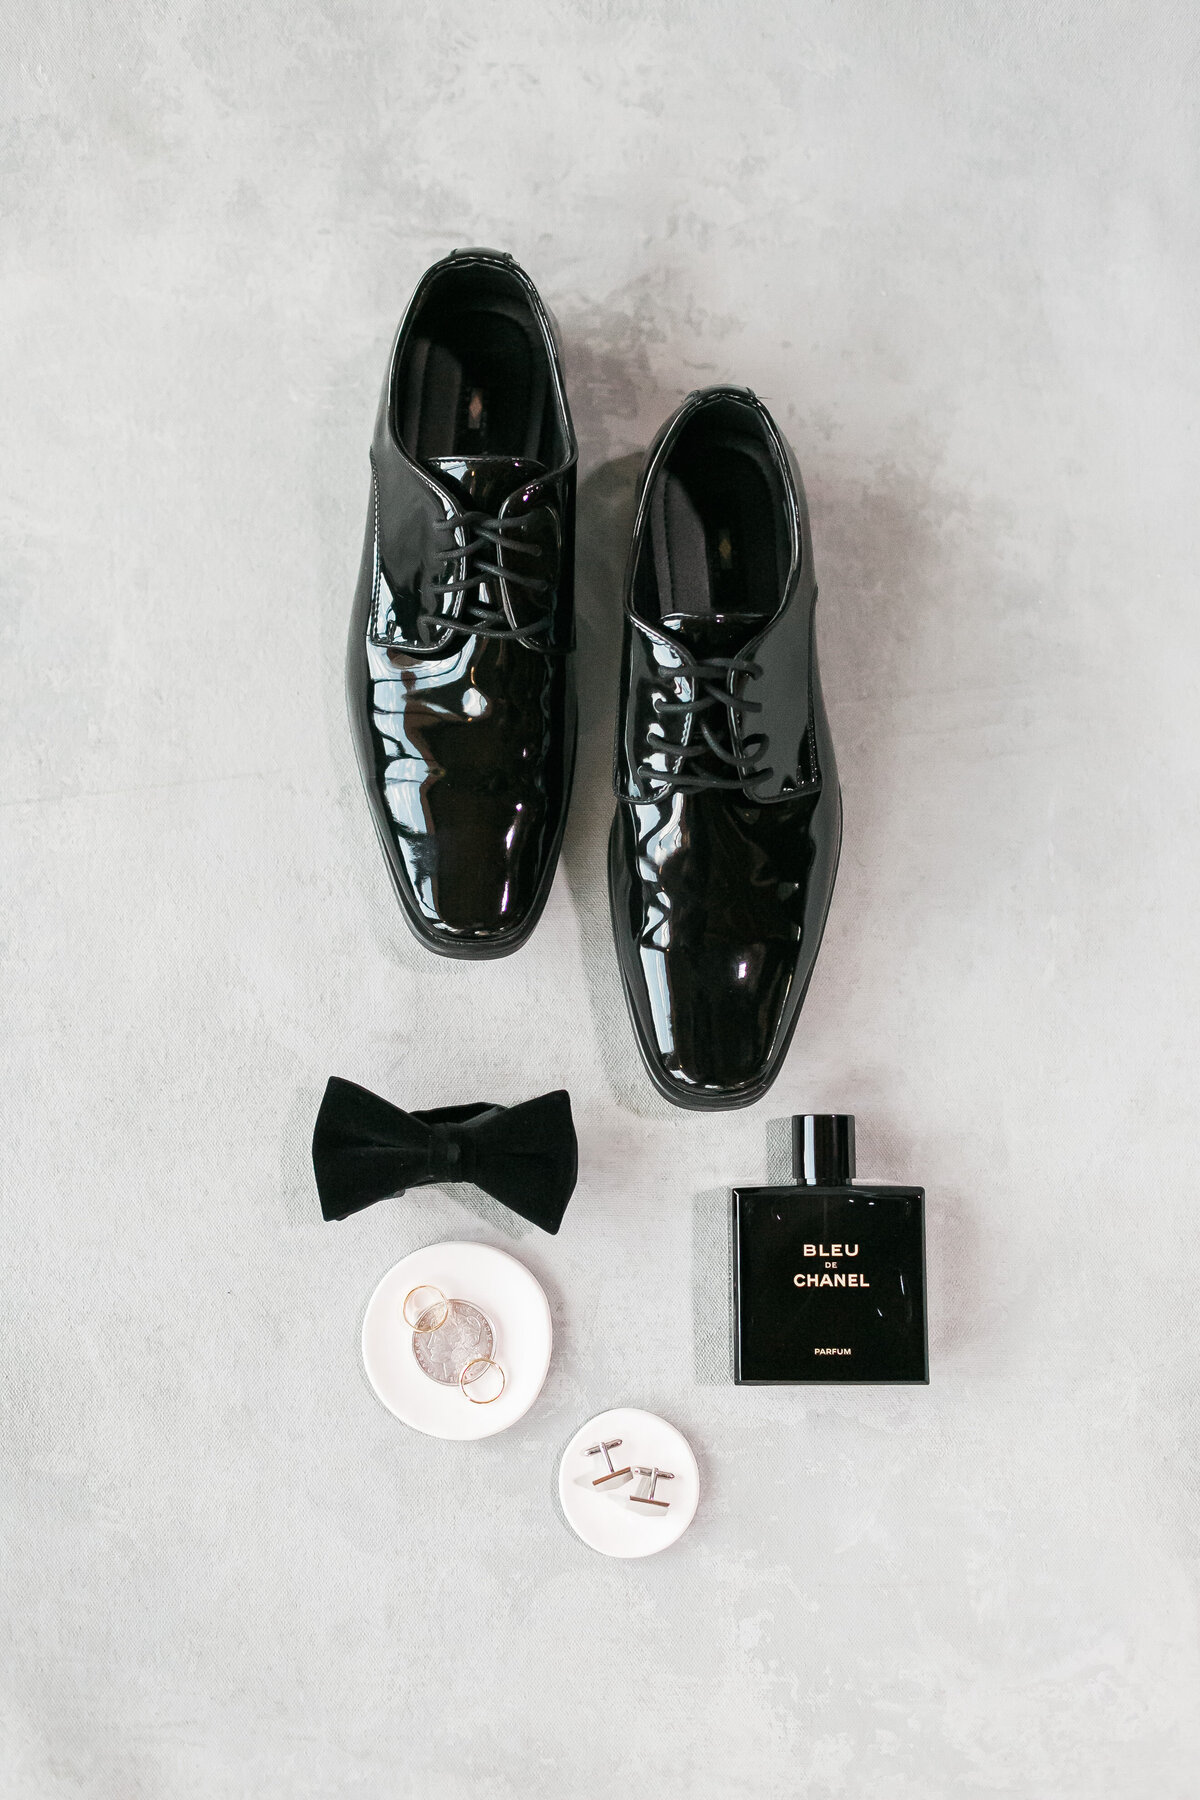 Close up of groom's wedding day accessories